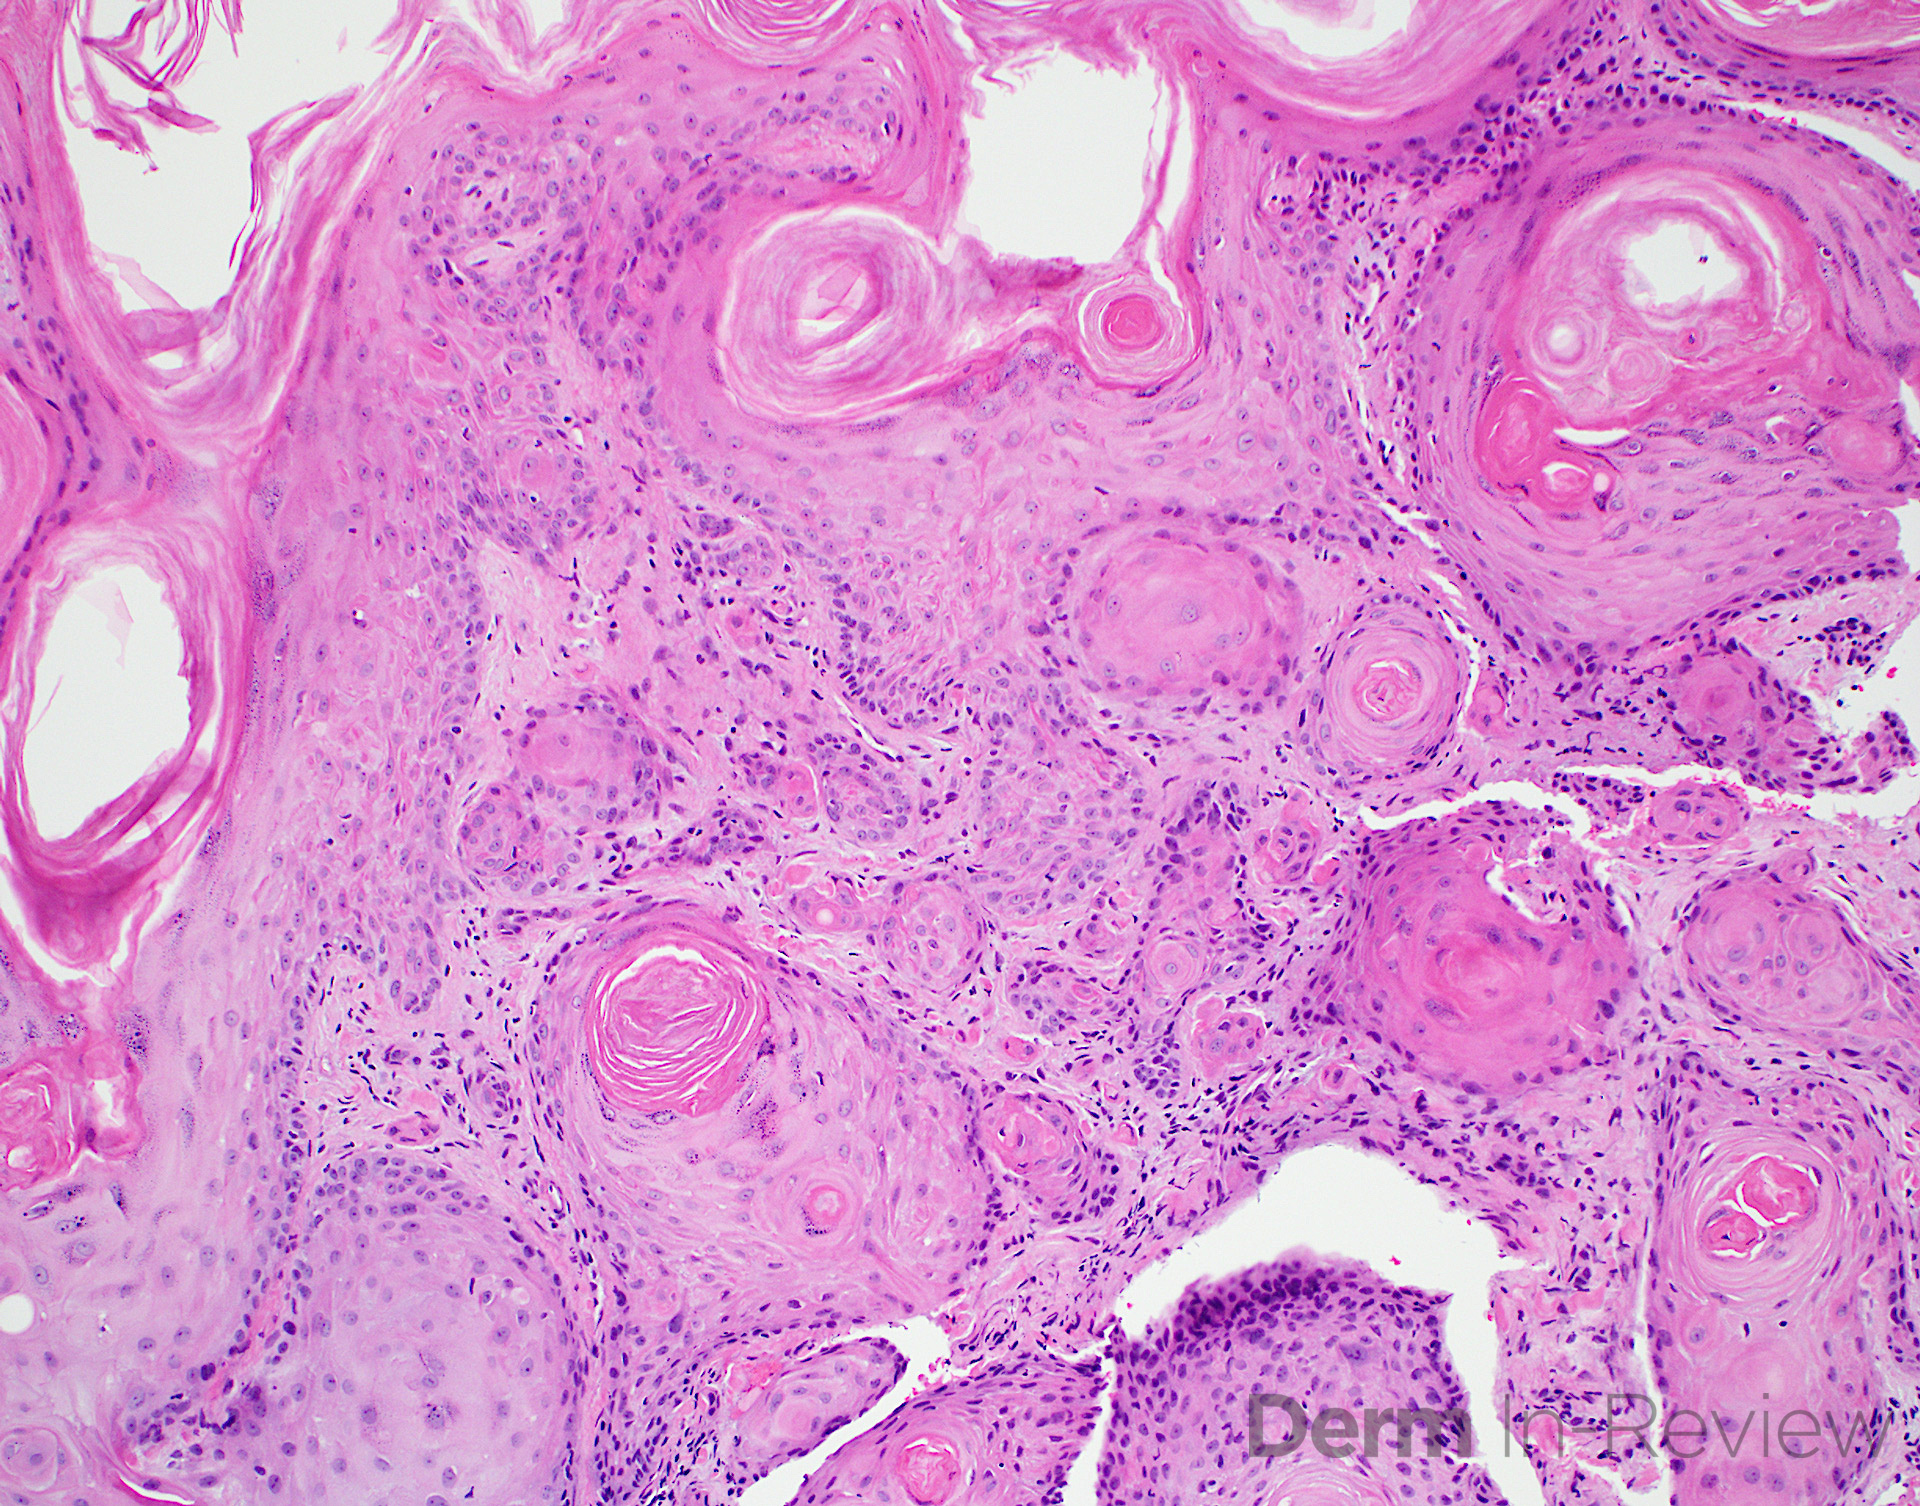 13.13 Squamous cell carcinoma